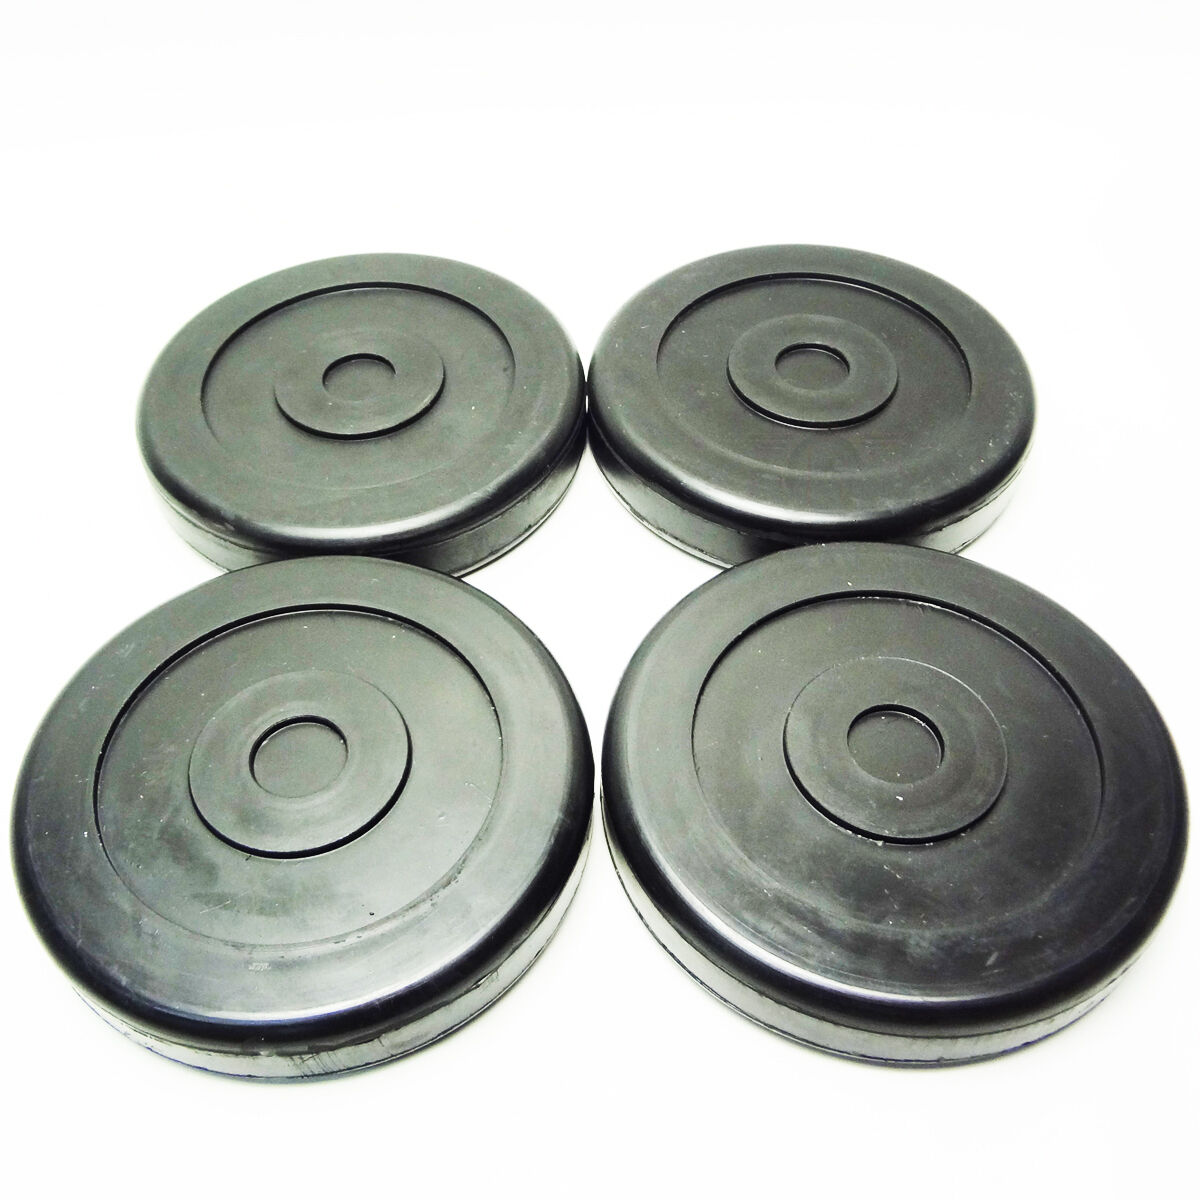 Round Rubber Arm Pads For Bendpak Lift Danmar Lift Set Of 4 Hd Slip On # 5715017